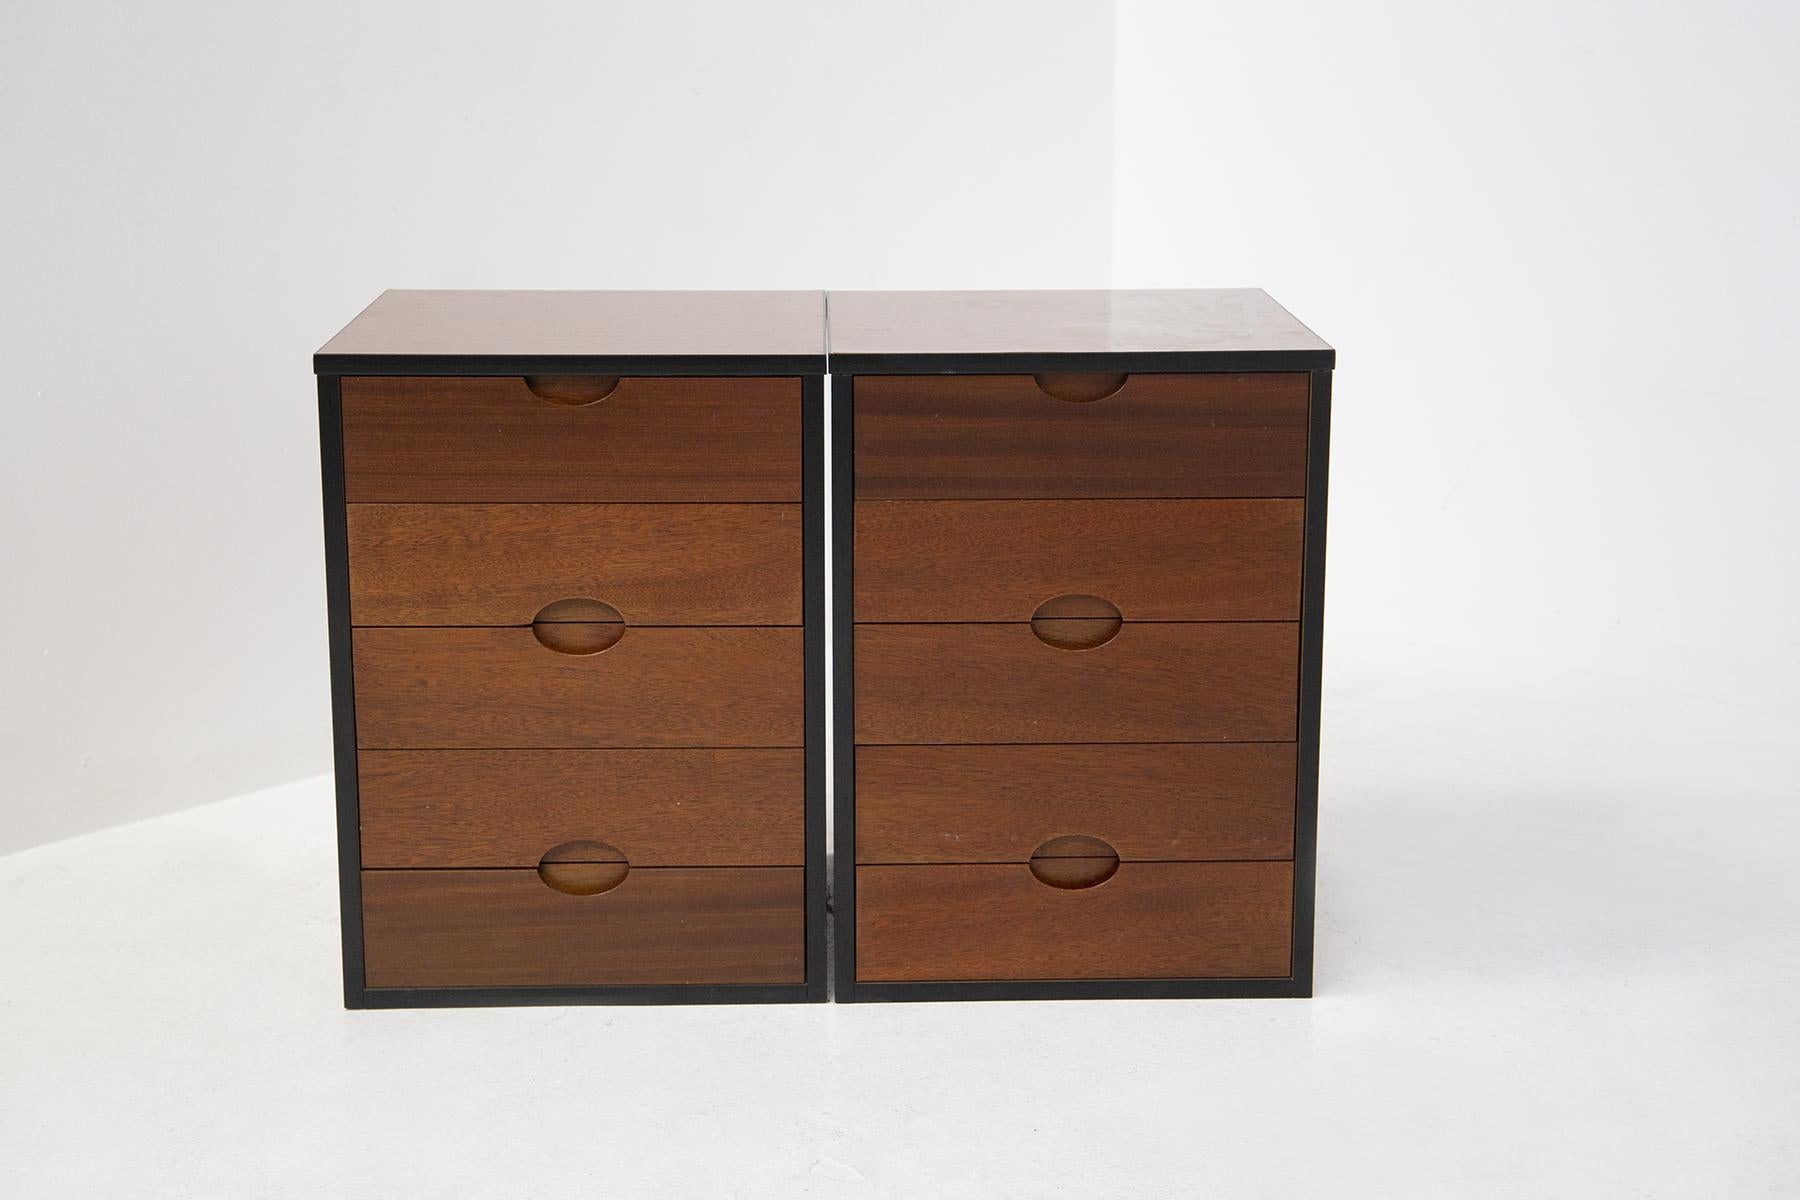 Italian Pair of Chest of Drawers in Wood by Luigi Caccia Dominioni for Vips Residence